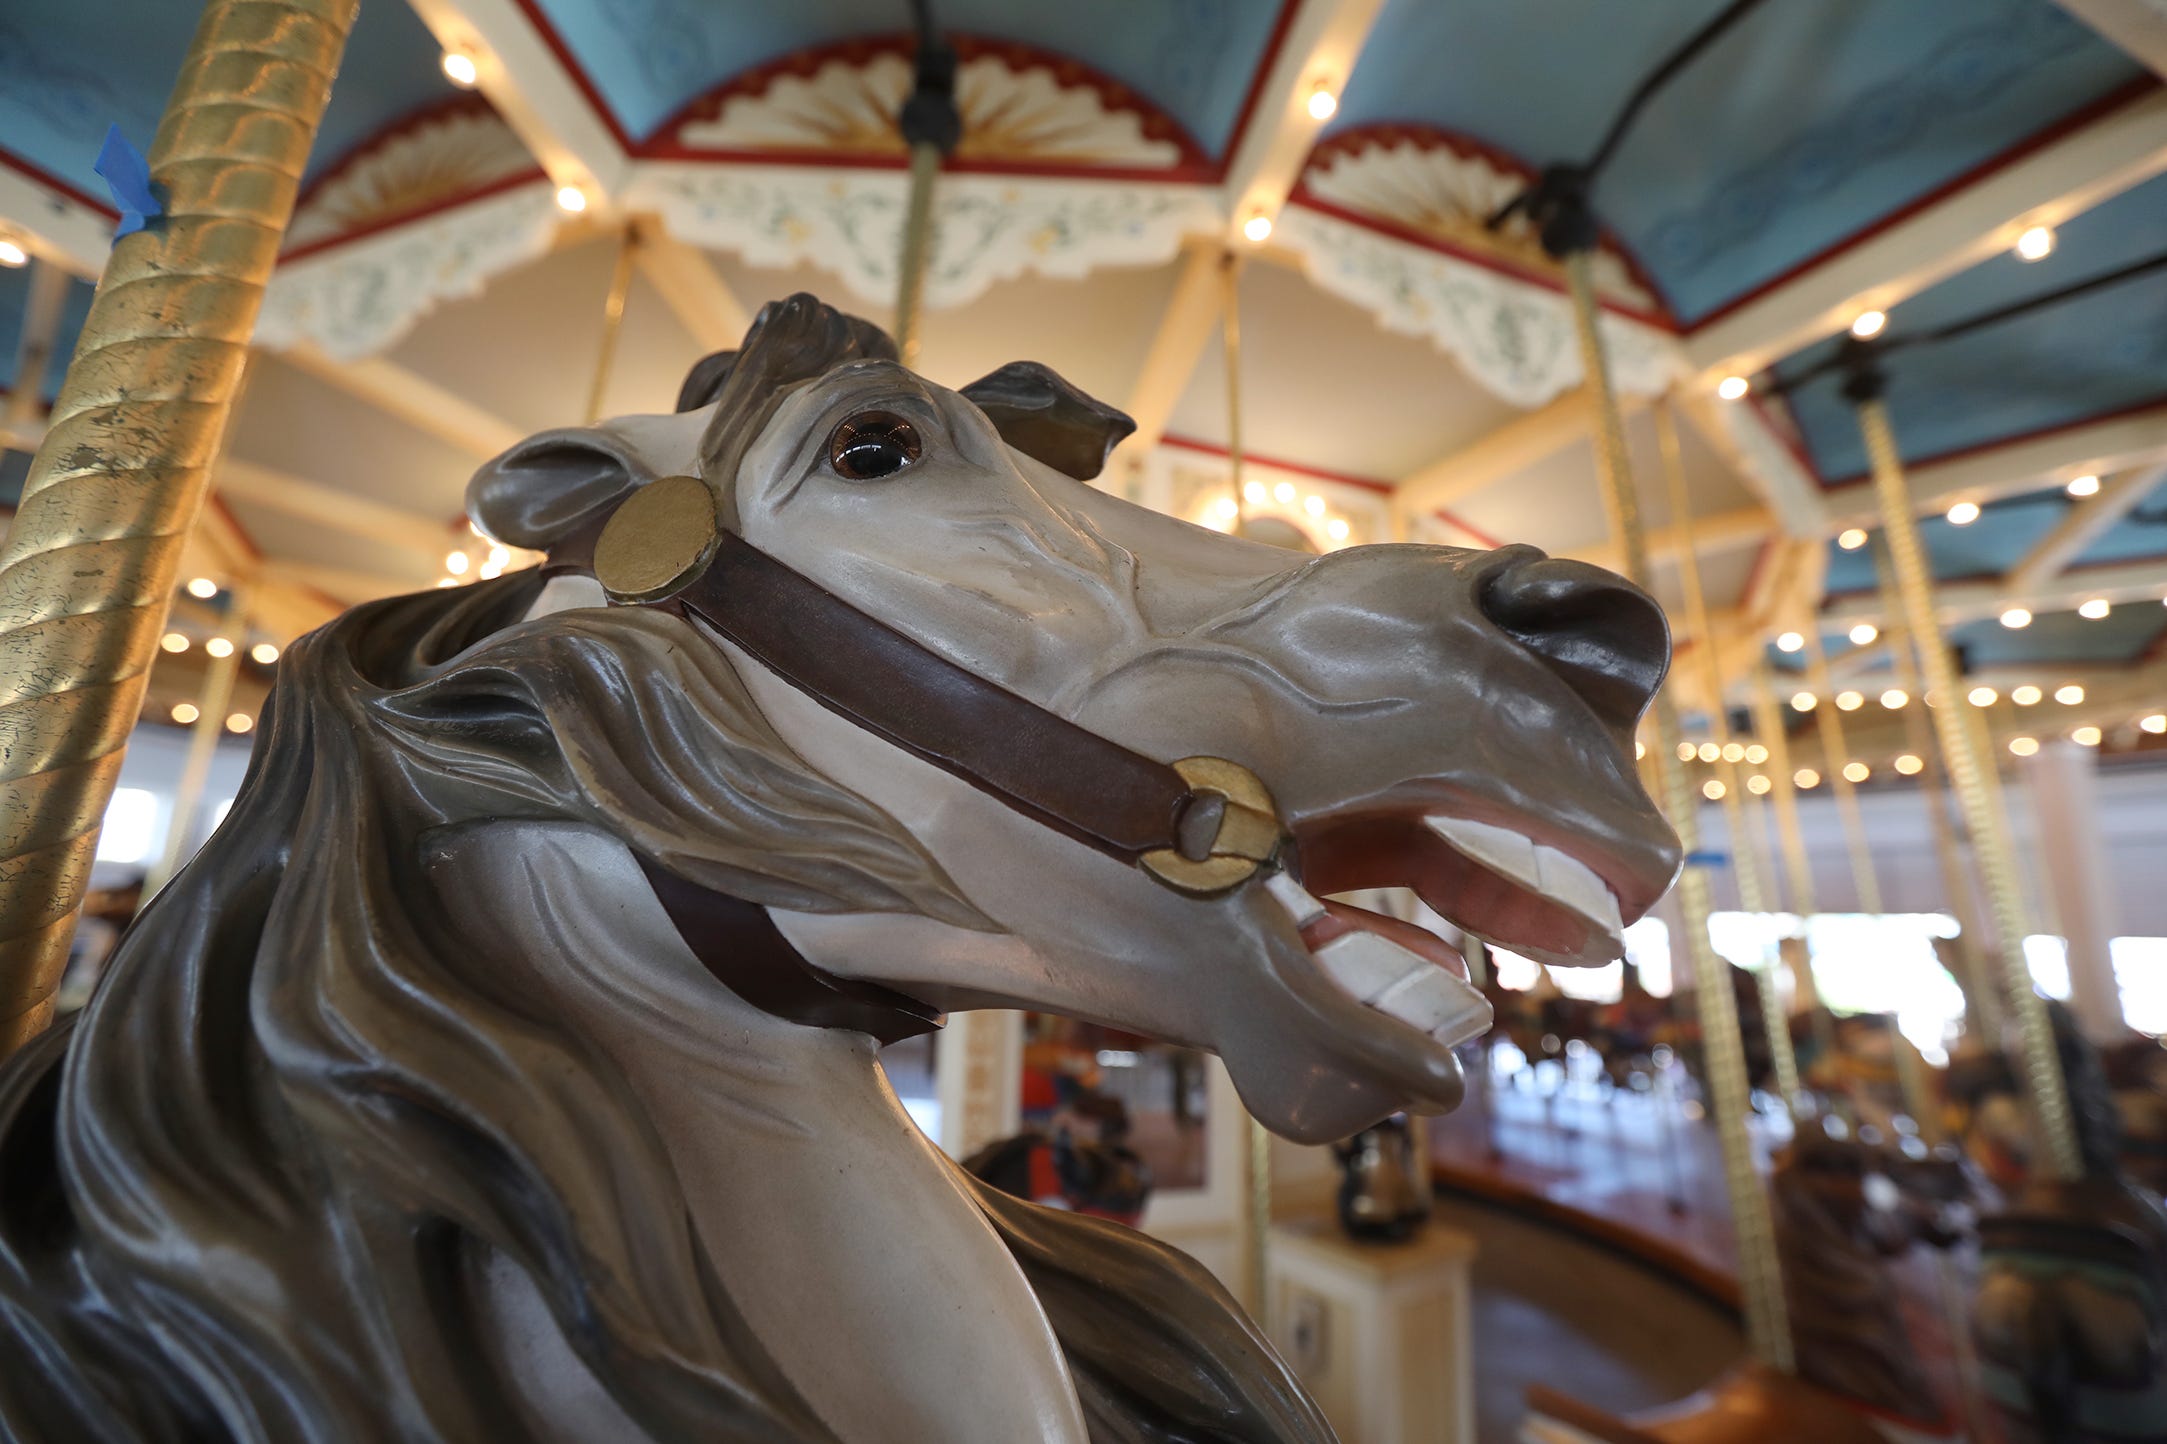 One of the handcarved horses on the carousel at Seabreeze.